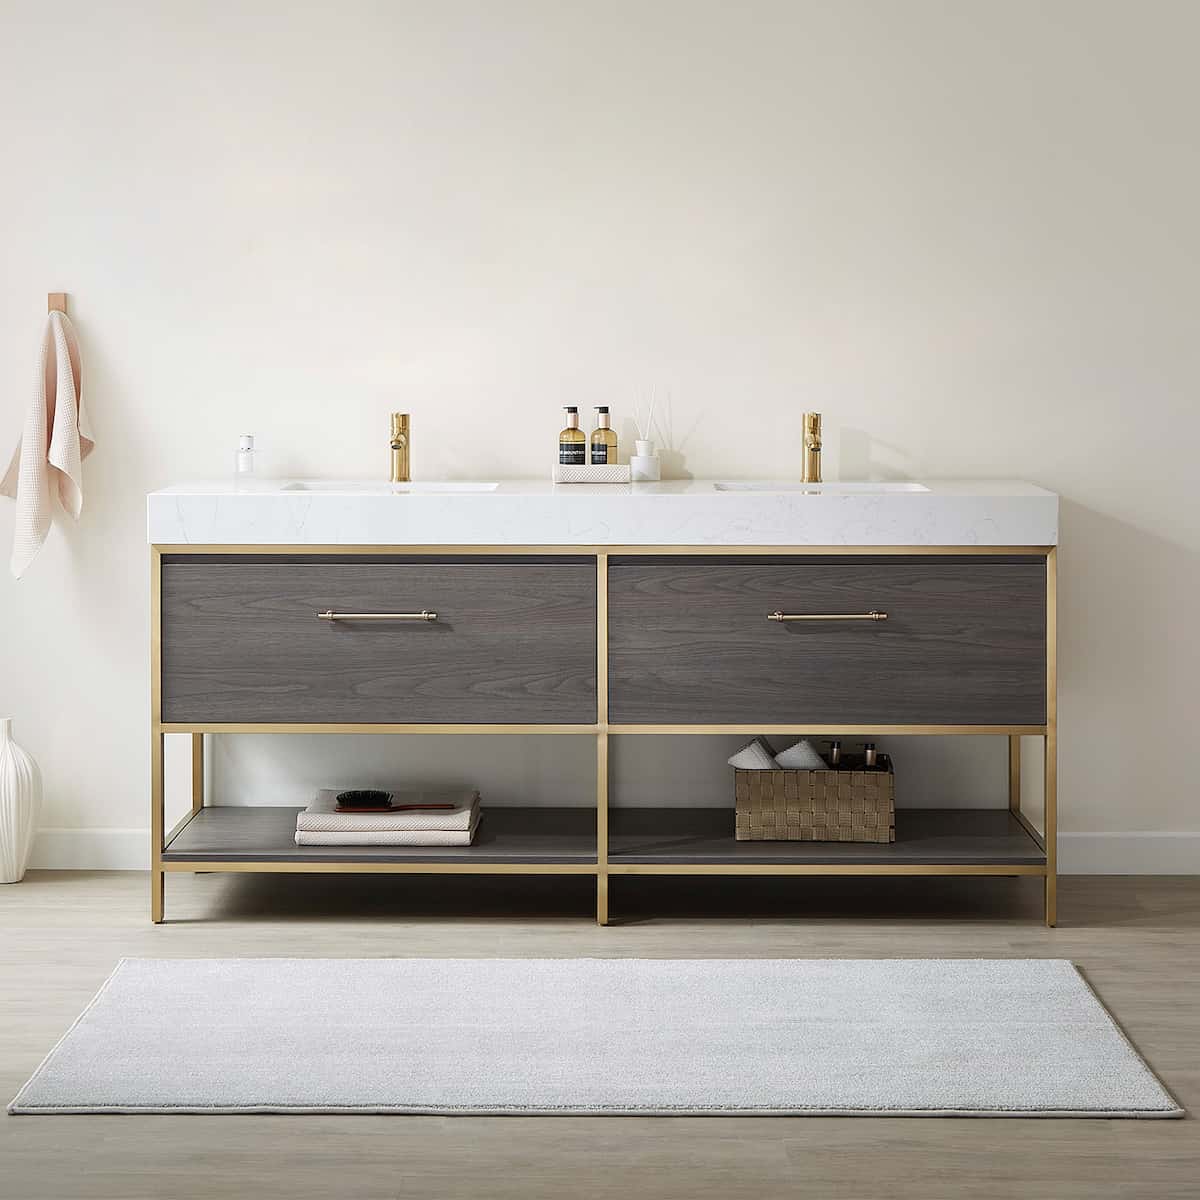 Vinnova Palma 72 Inch Freestanding Double Sink Bath Vanity in Suleiman Oak with White Composite Grain Stone Without Mirror in Bathroom 701272G-SO-GW-NM